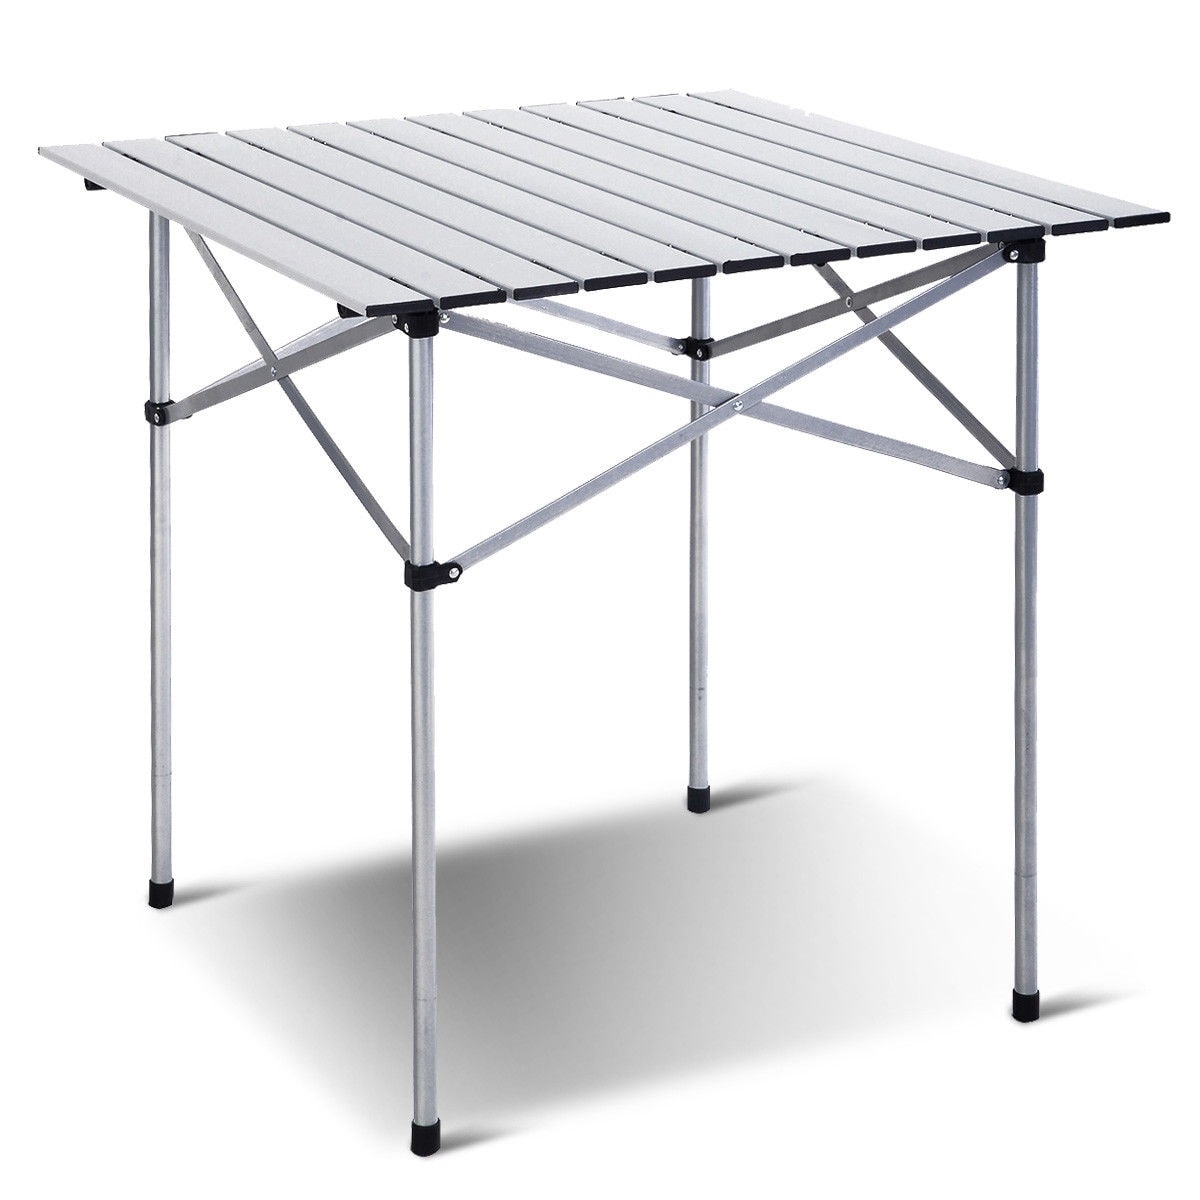 Picnic Table Patio Outdoor Folding Portable Camping Square Top Dining Aluminum 